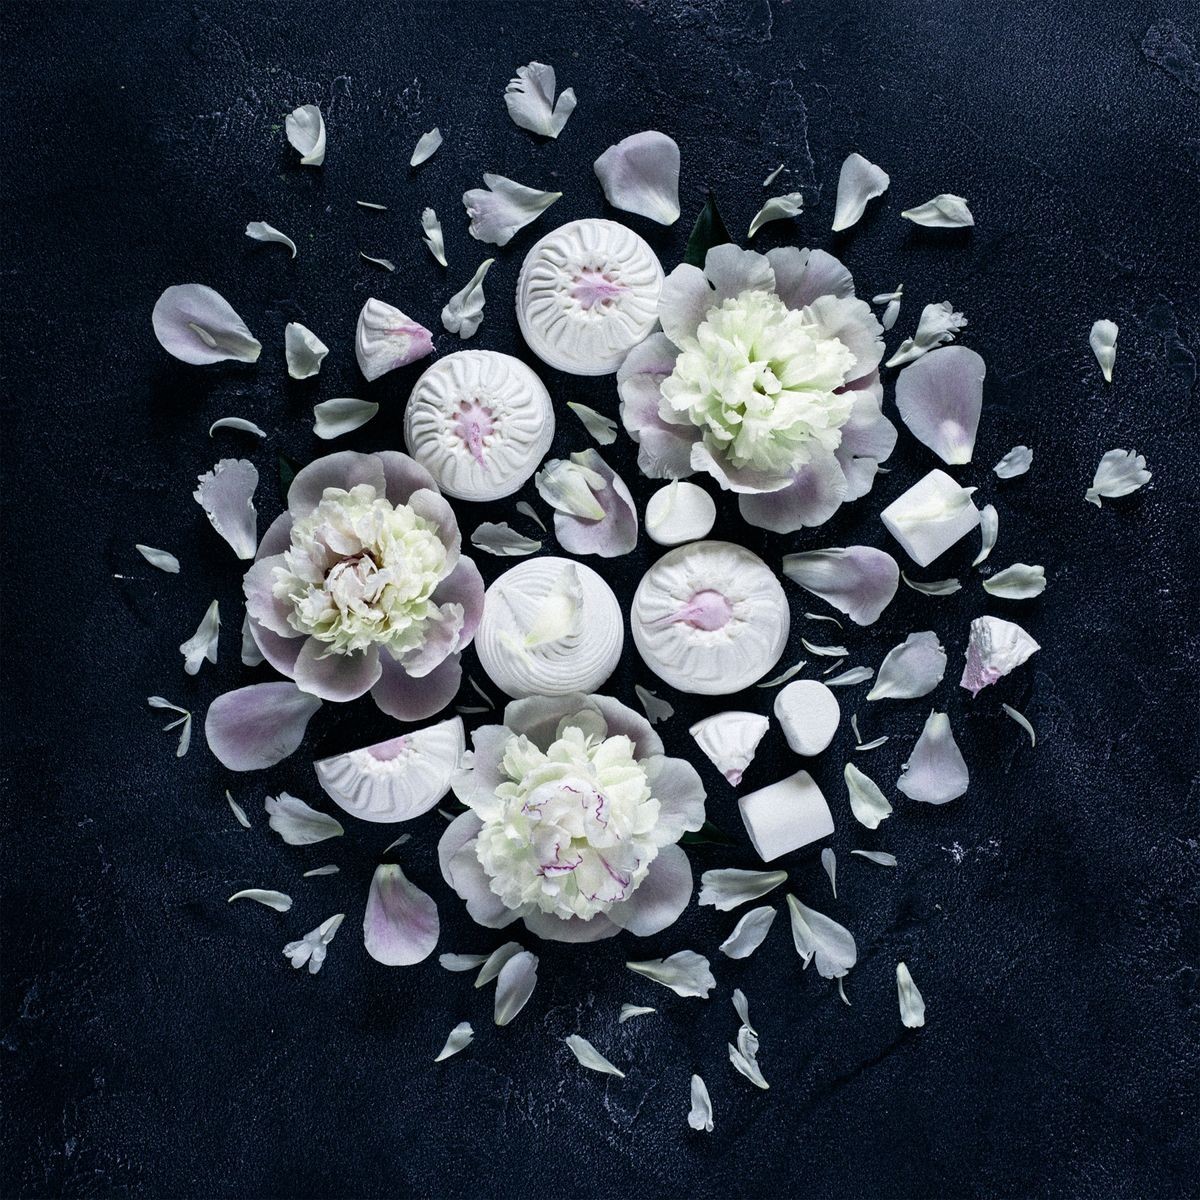 White marshmallow of different shapes and white flowers on a dark background in the form of a square